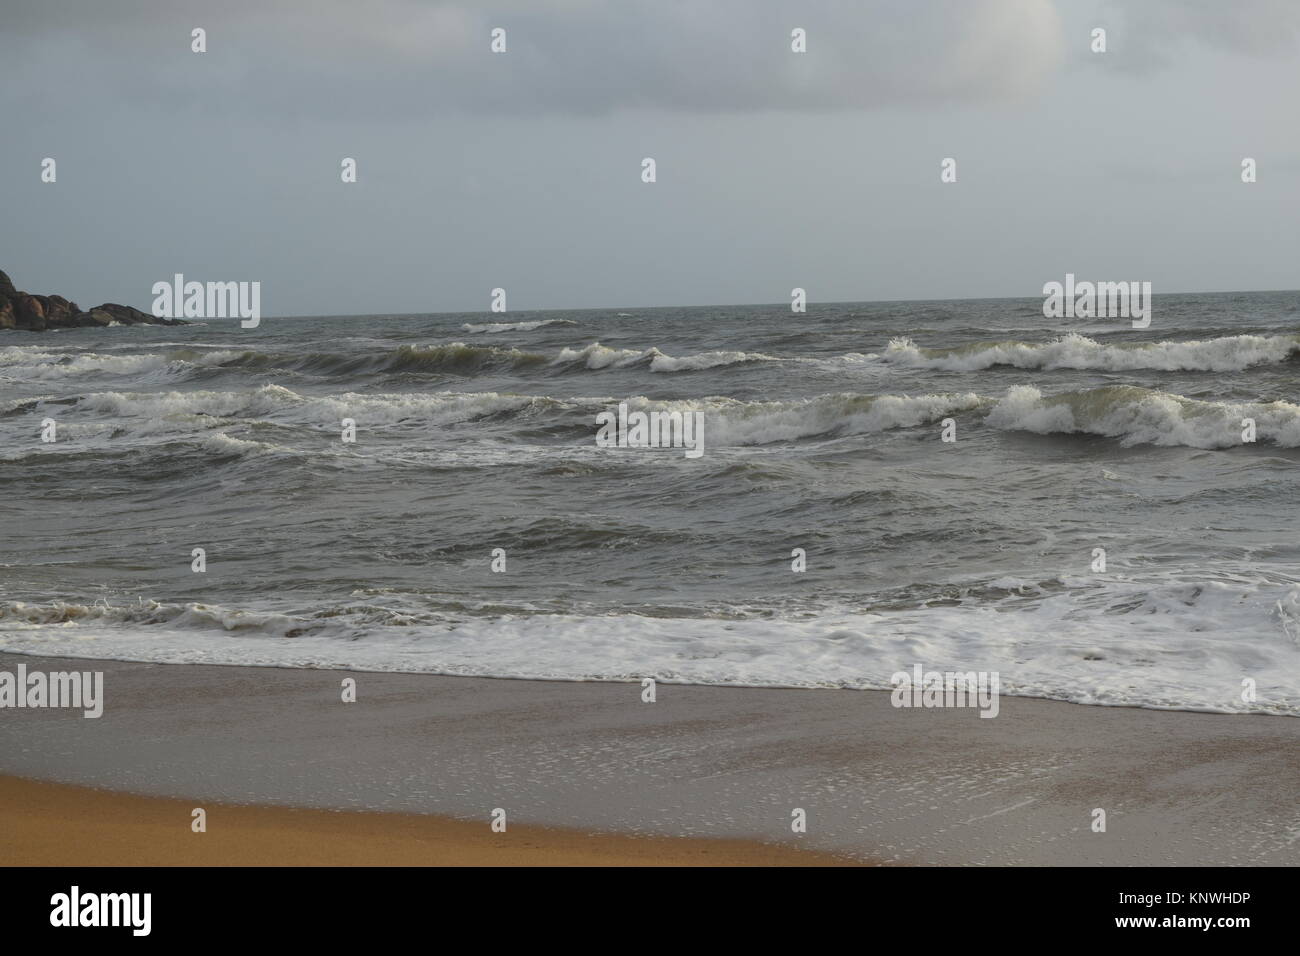 Sandy beach images on a cloudy day. Cool beach with no people. Beautiful beach background for website or desktop. Seashore / ocean / beach view. Stock Photo